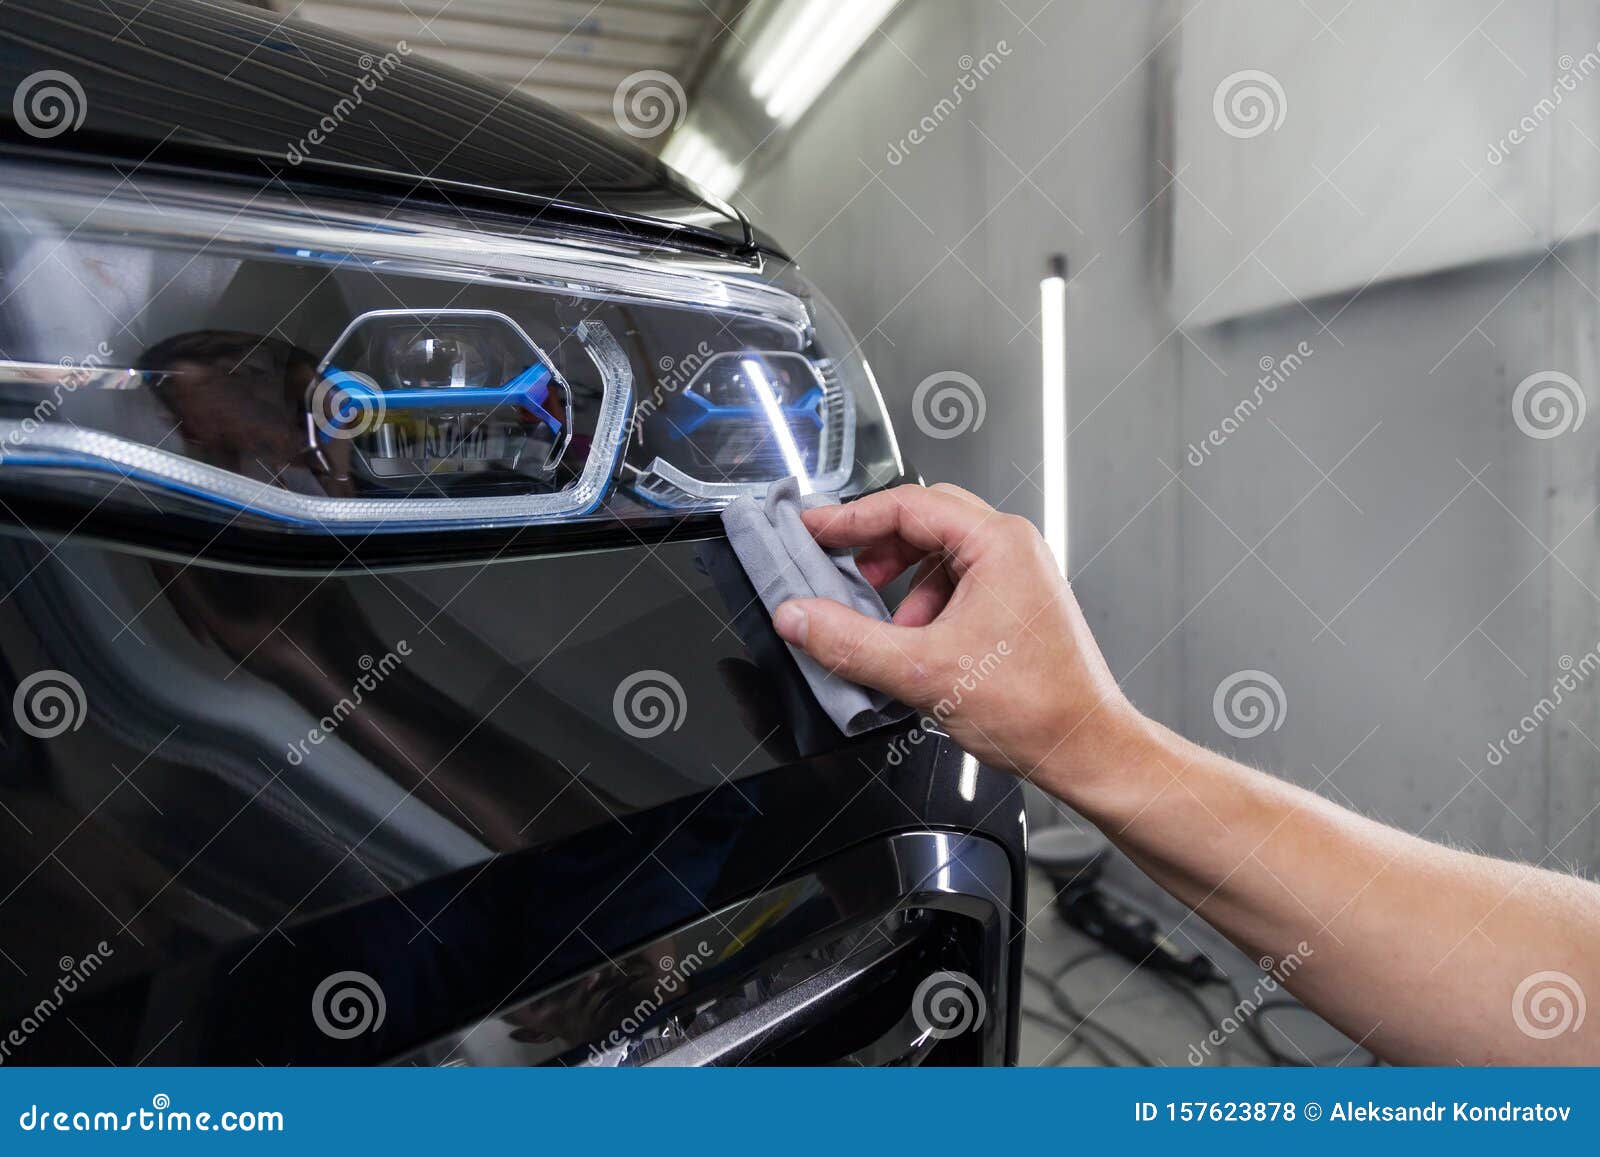 the process of applying a nano-ceramic coating on the car`s bumper by a male worker with a sponge and special chemical compositio